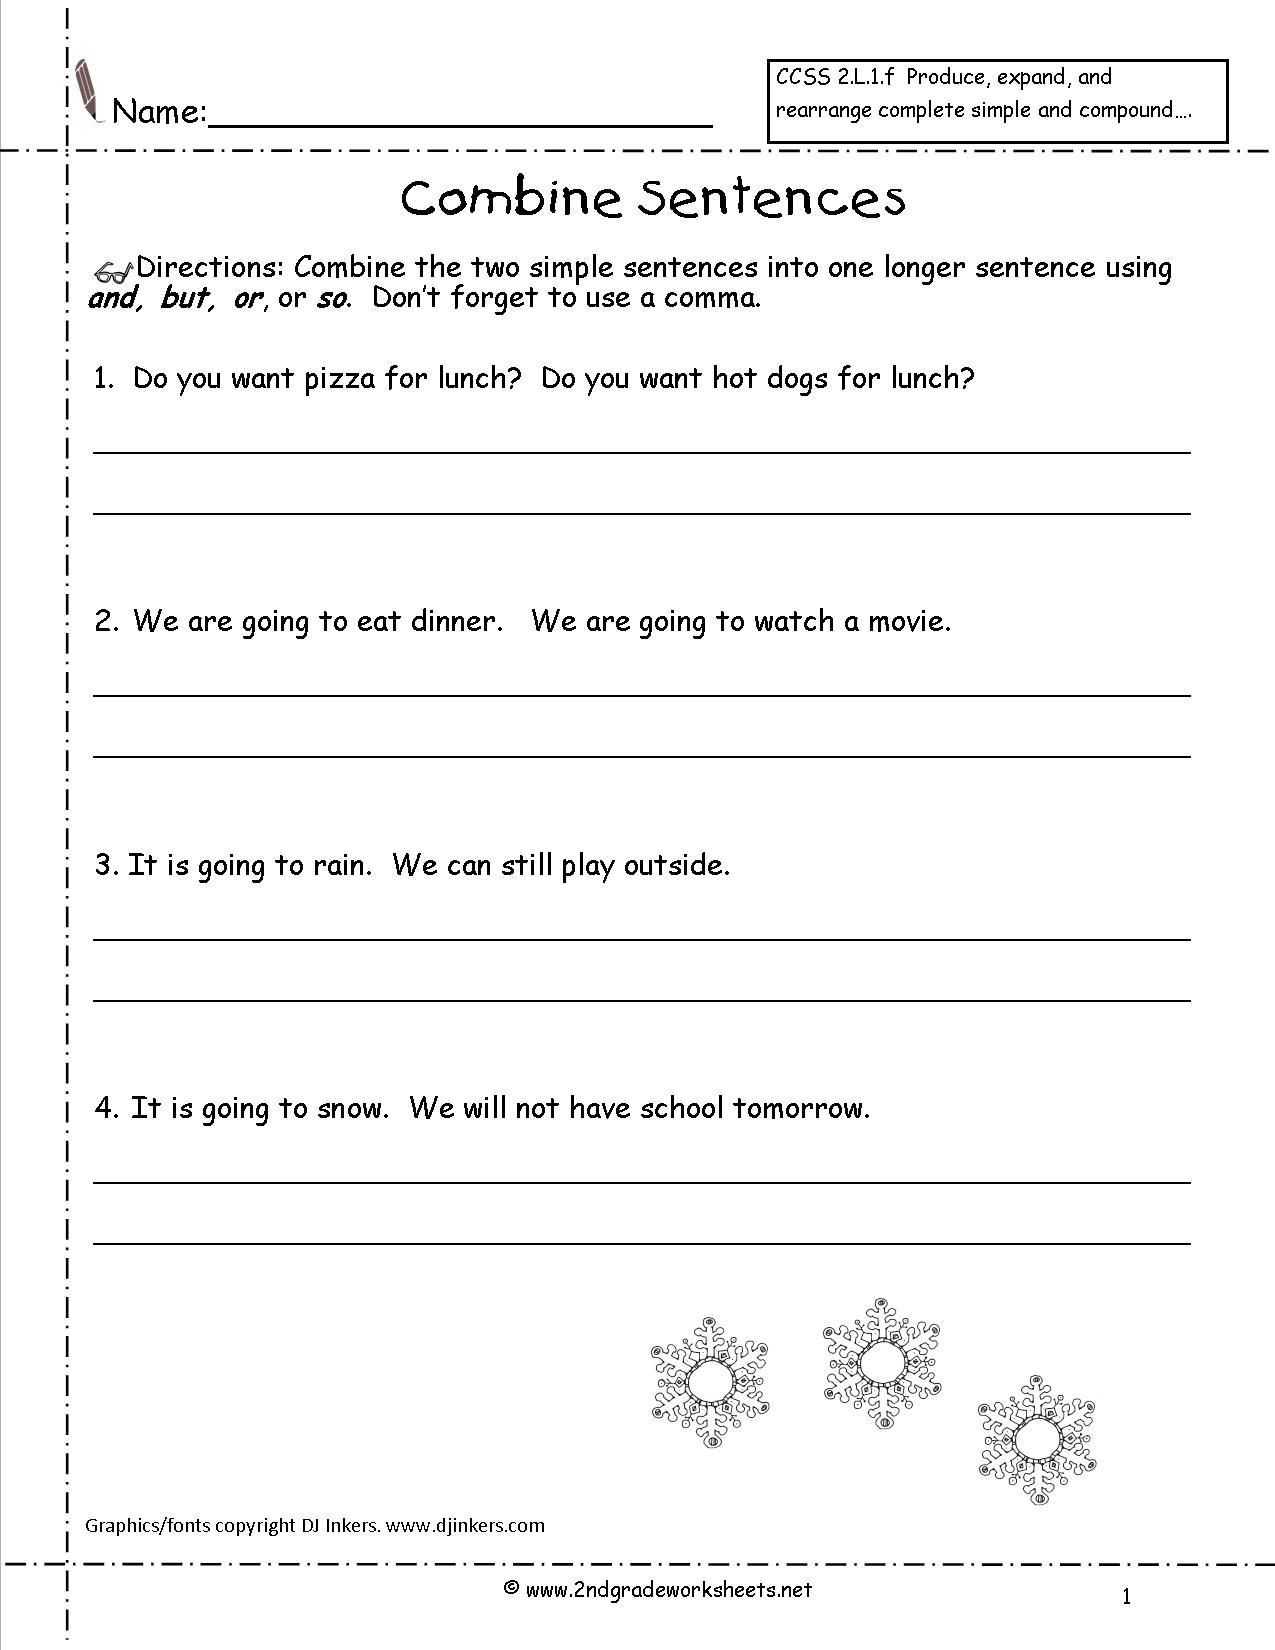 Free Worksheets On Adding Modifiers To Combine Sentences